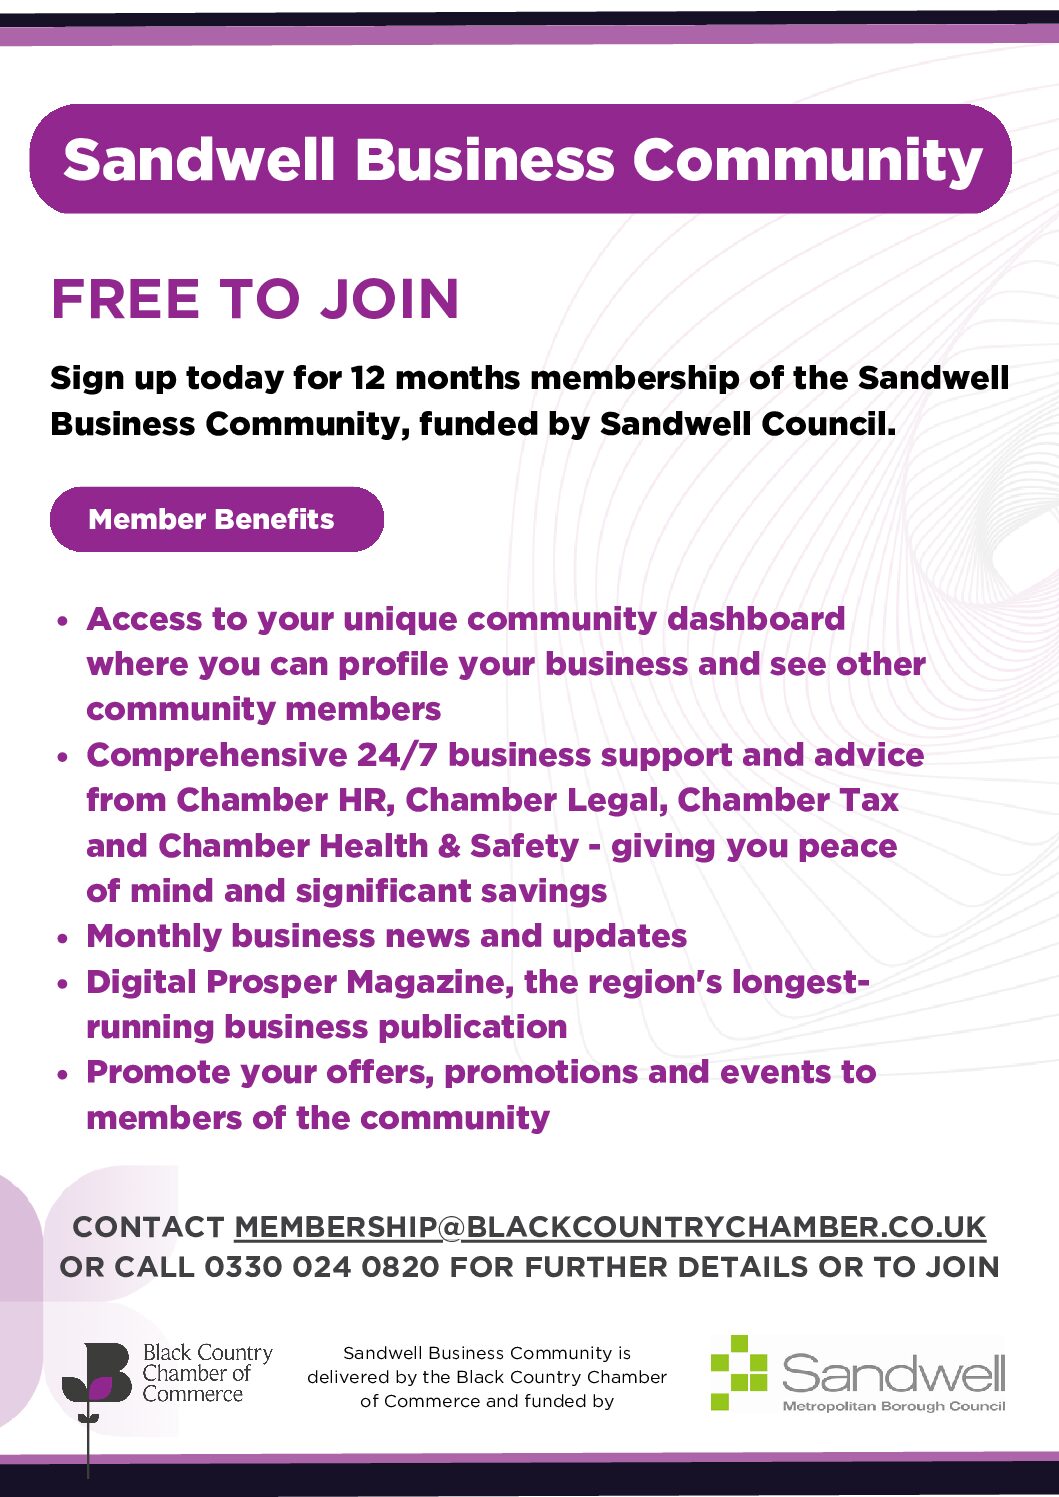 Join Sandwell Business Community through Black Country Chamber of Commerce – Funded by SMBC